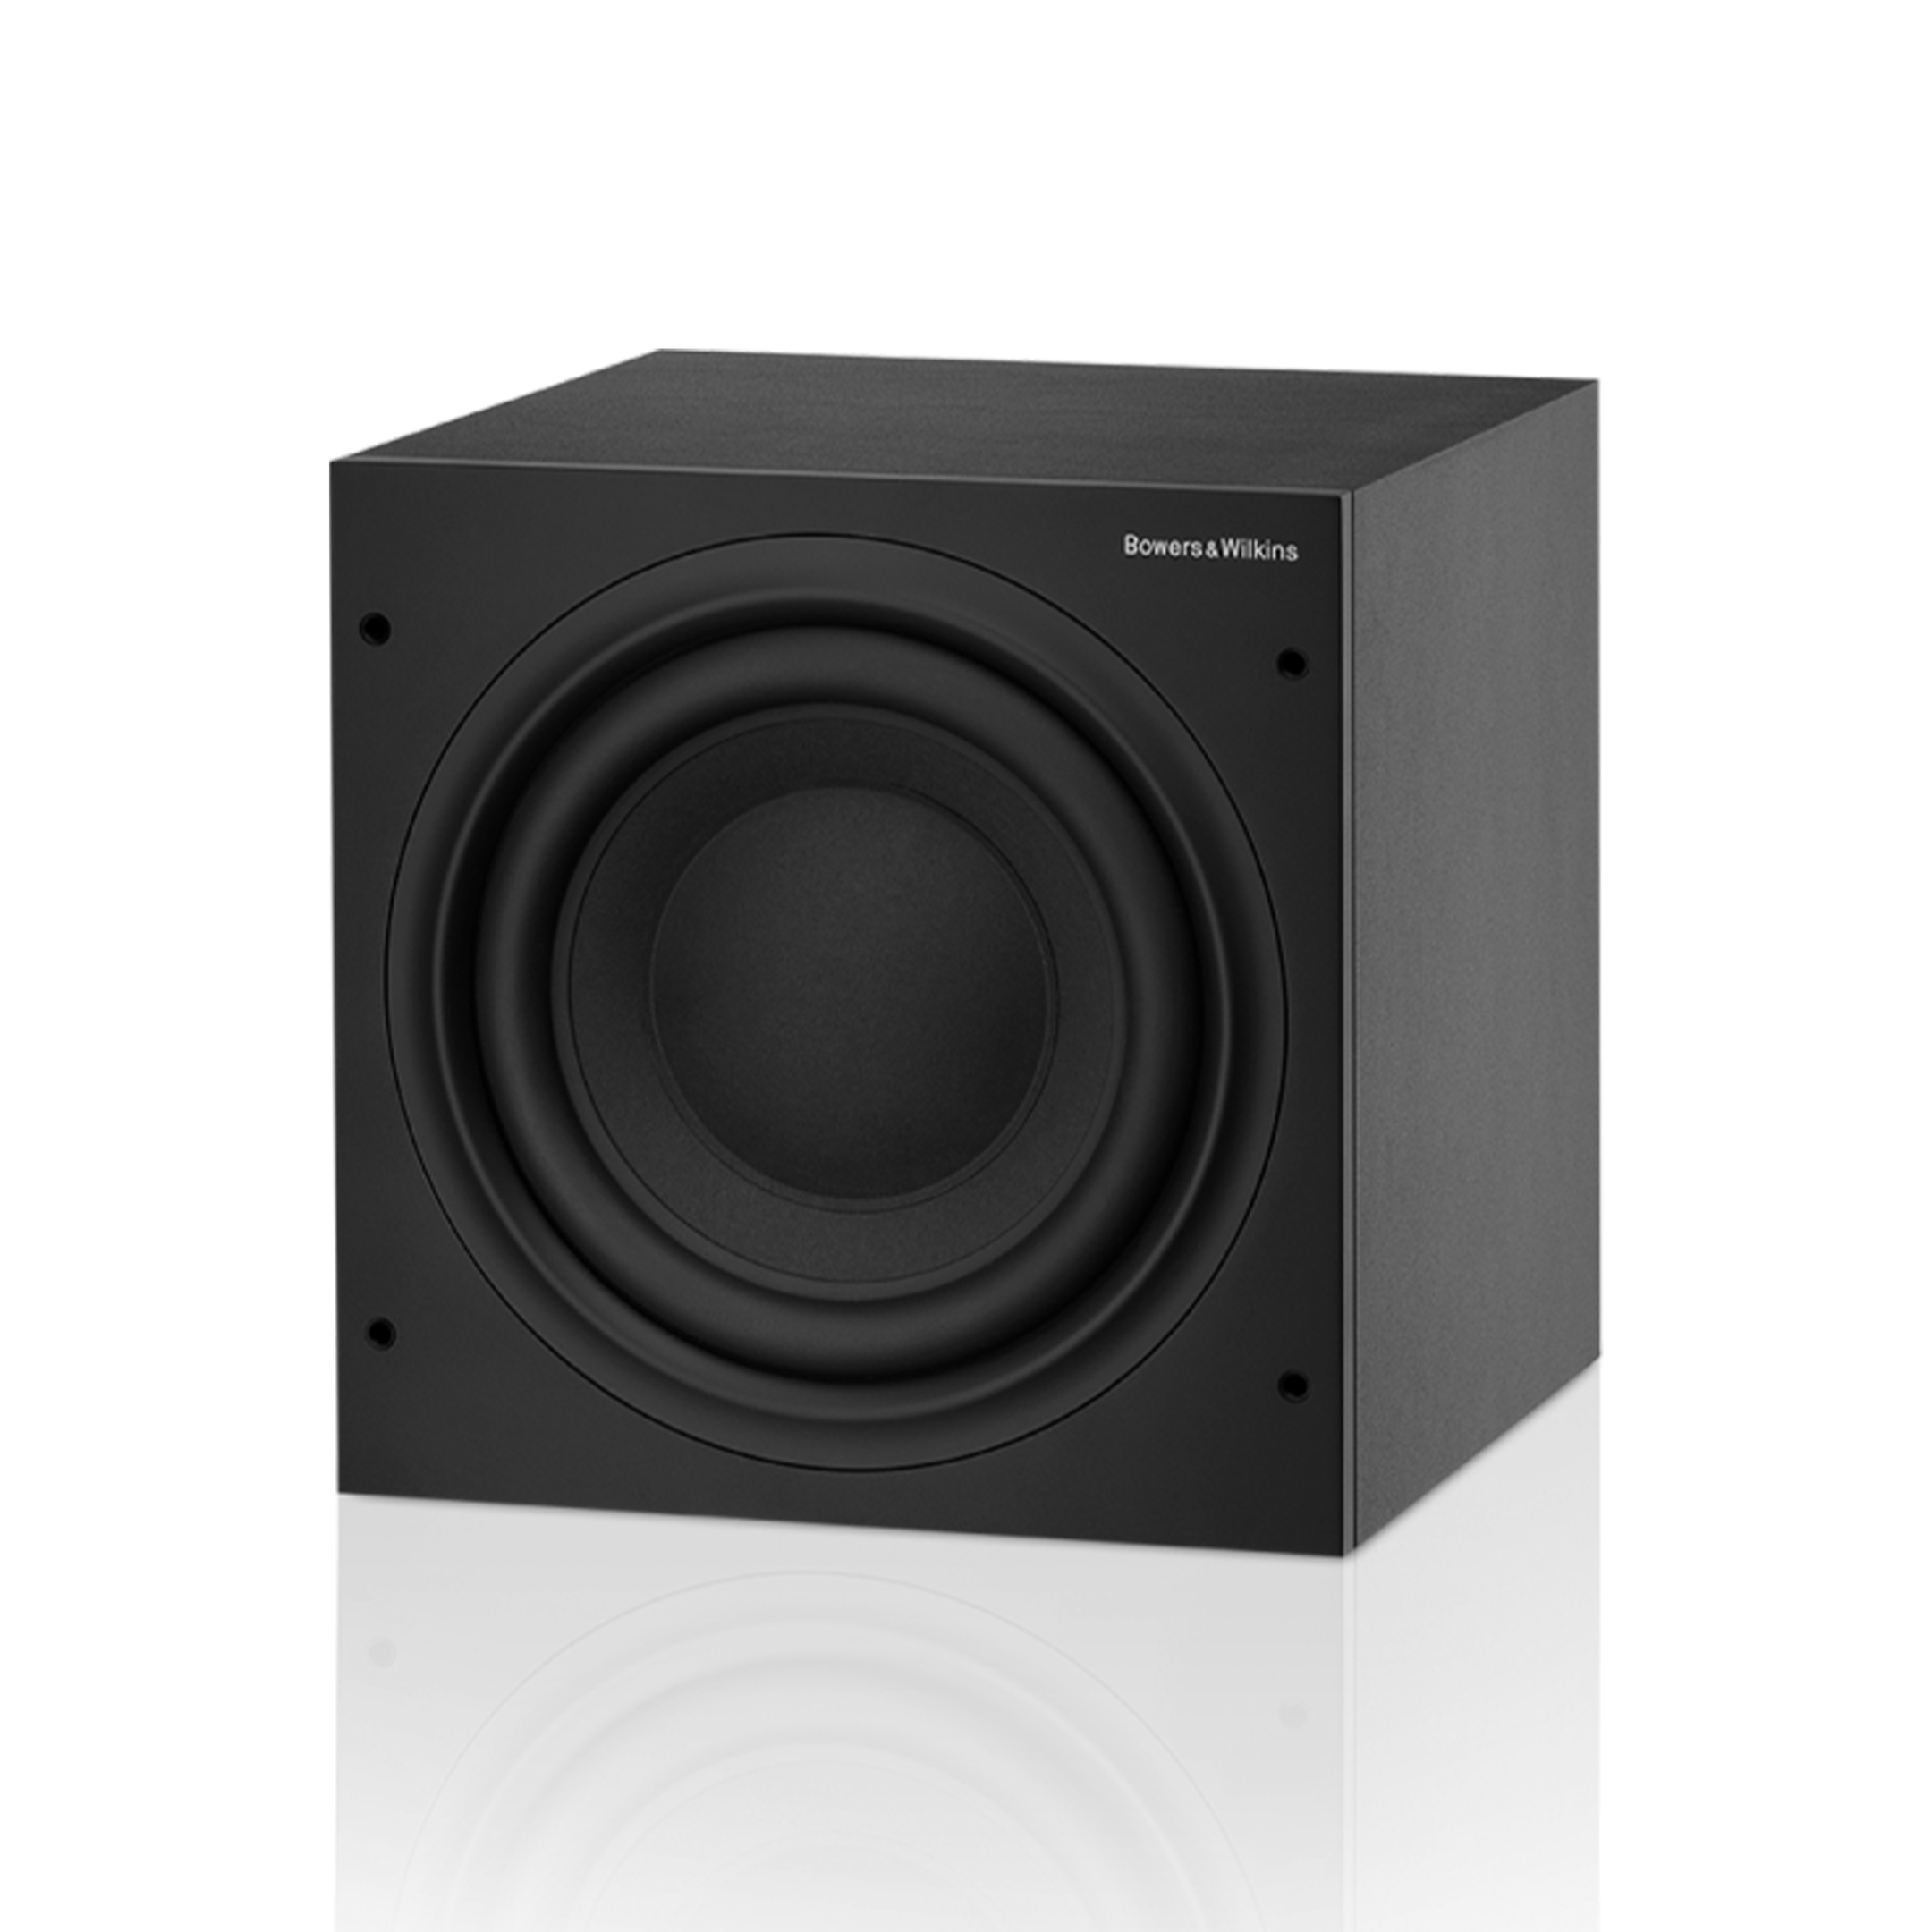 Bowers & Wilkins ASW608 - 8" 200W Active Subwoofer (Certified Refurbished)